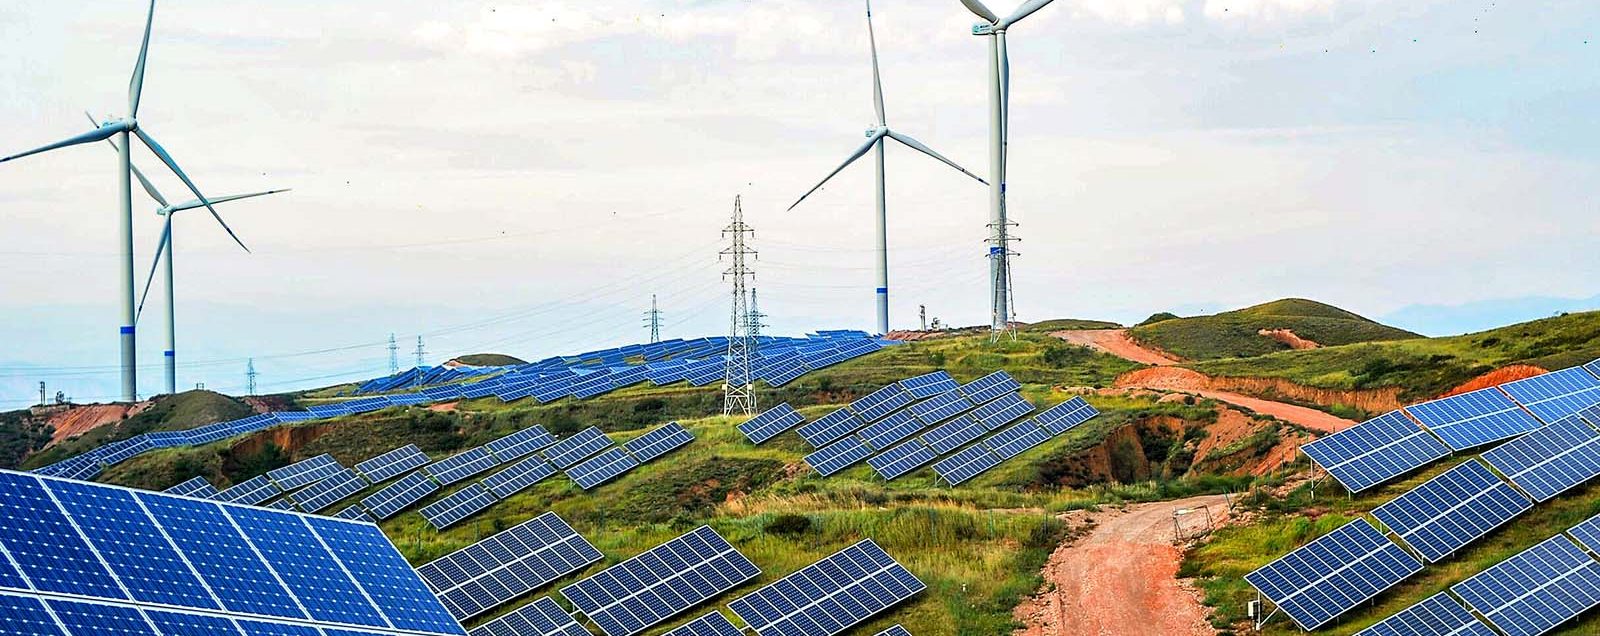 ZHANGJIAKOU, CHINA - JULY 02: Solar panels and wind turbines are pictured on a barren mountain at Shenjing Village on July 2, 2018 in Zhangjiakou, Hebei Province of China. The installed capacity of renewable energy electricity generation in Zhangjiakou has reached 12.03 million kilowatts. (Photo by VCG)